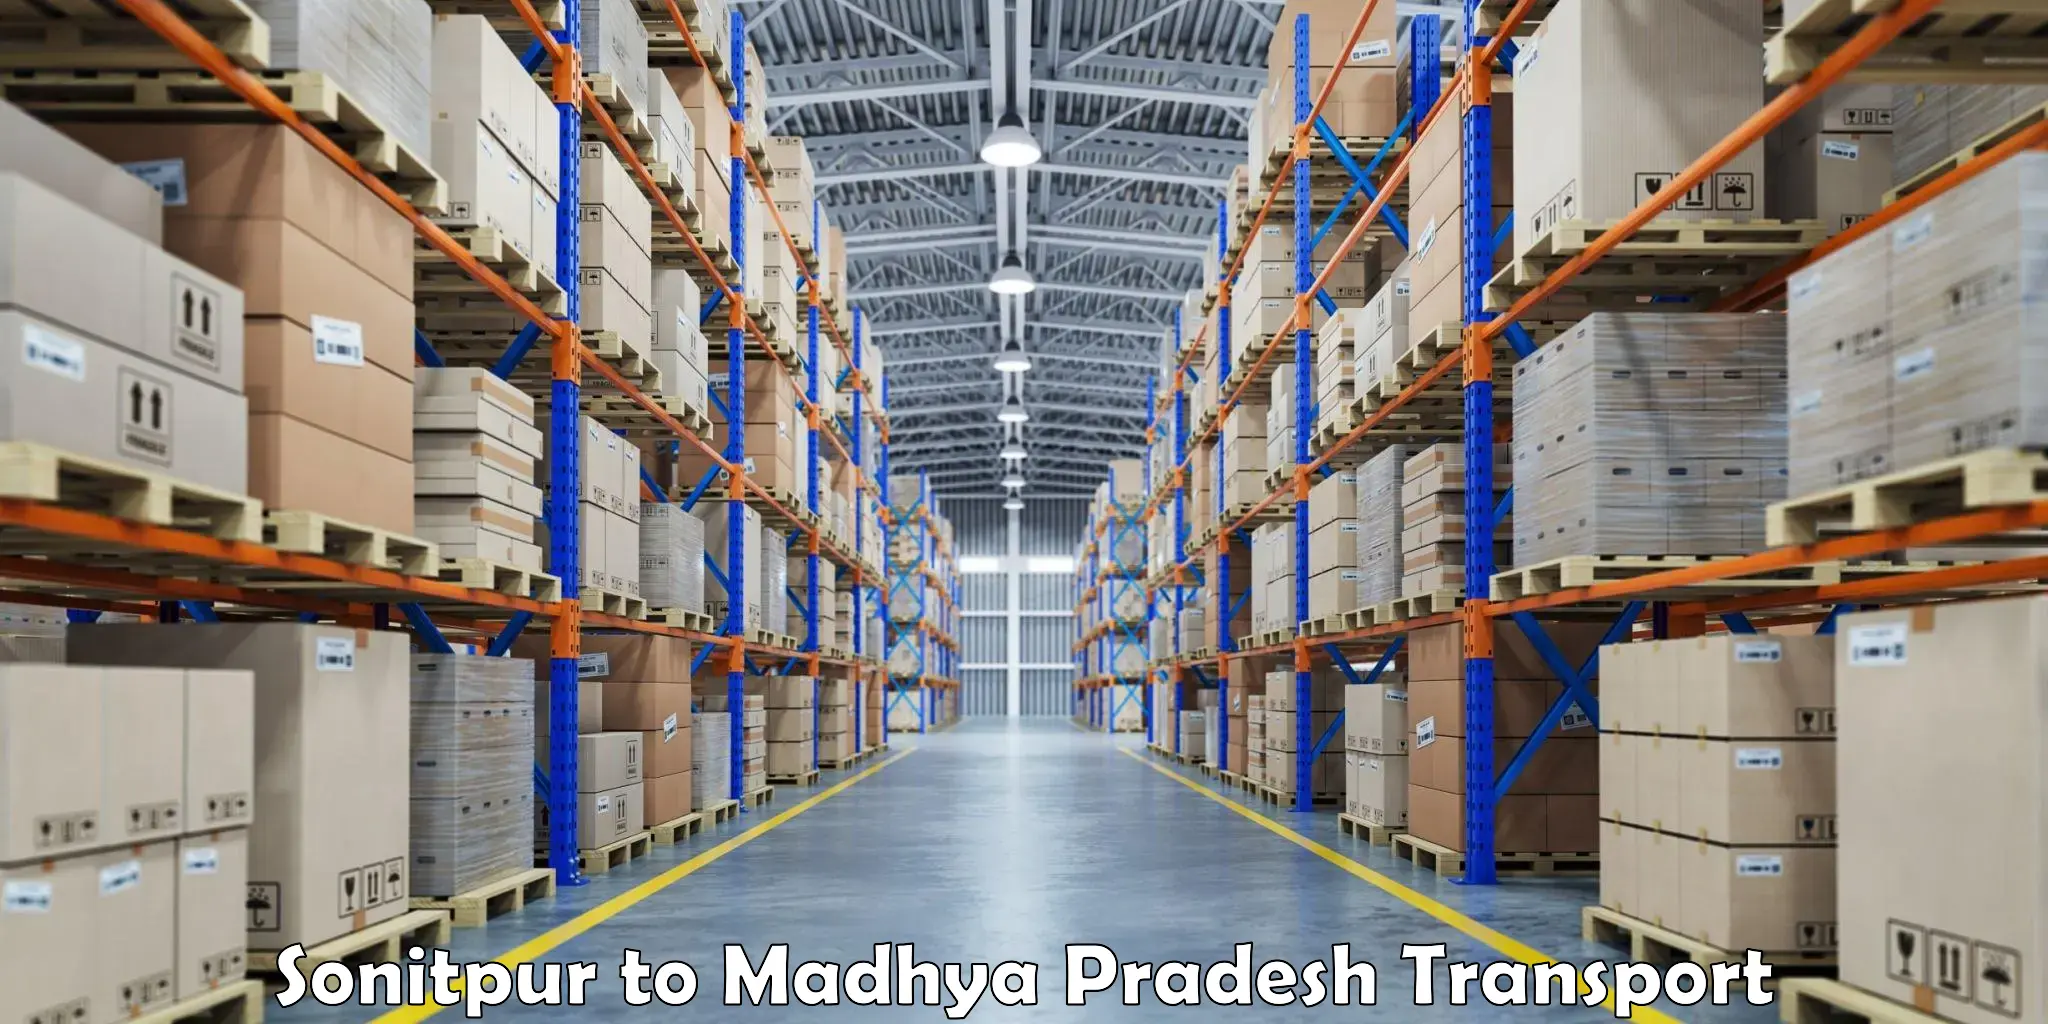 Daily parcel service transport Sonitpur to Khandwa